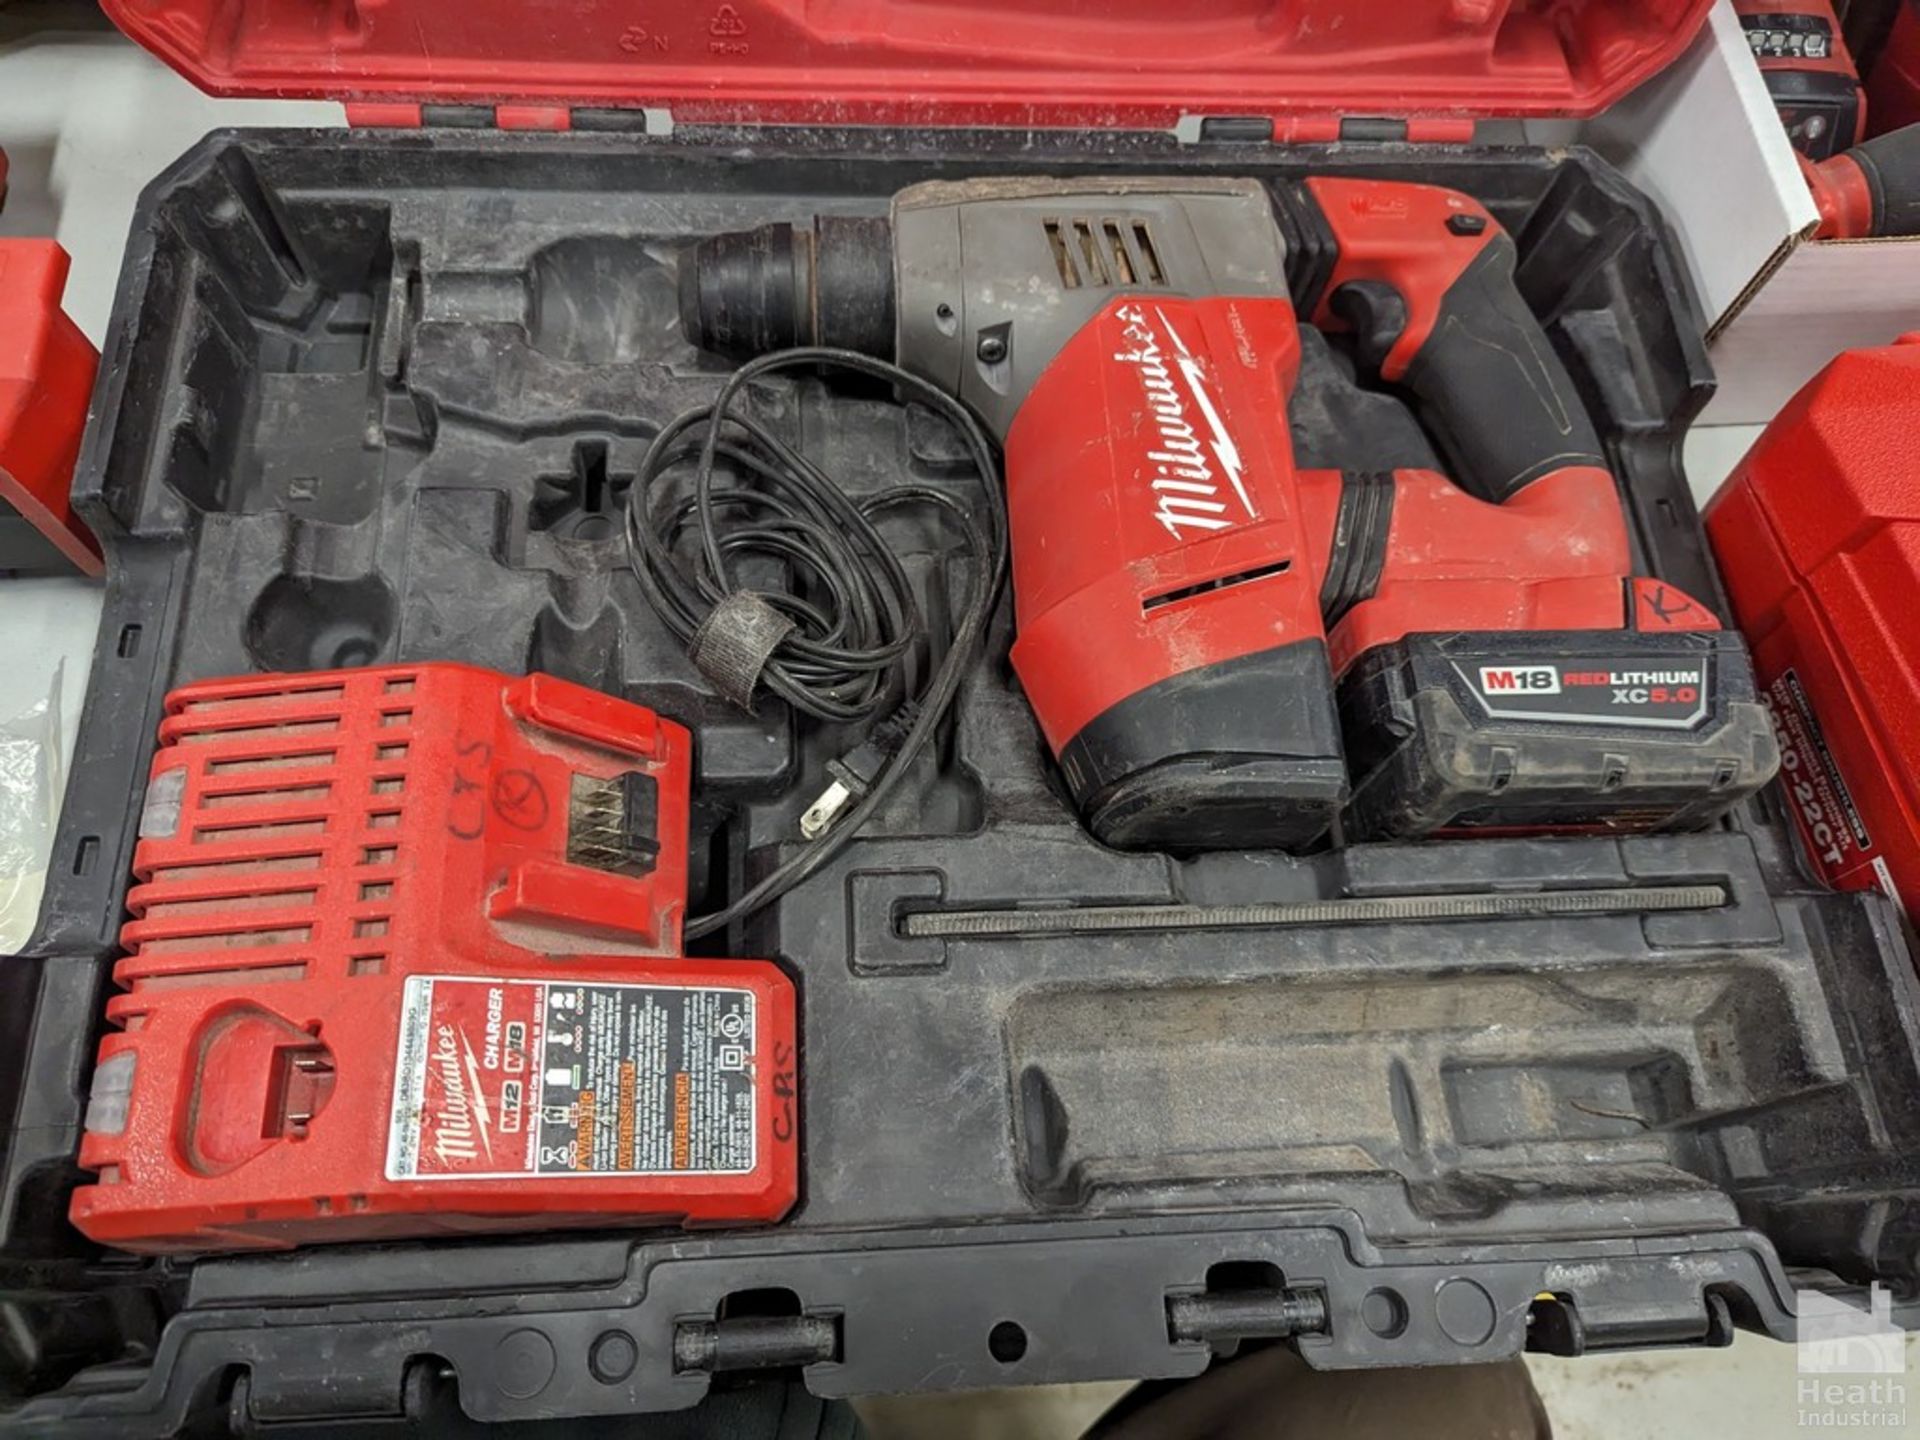 MILWAUKEE 18 VOLT ROTARY HAMMER DRILL WITH BATTERY, CHARGER AND CASE